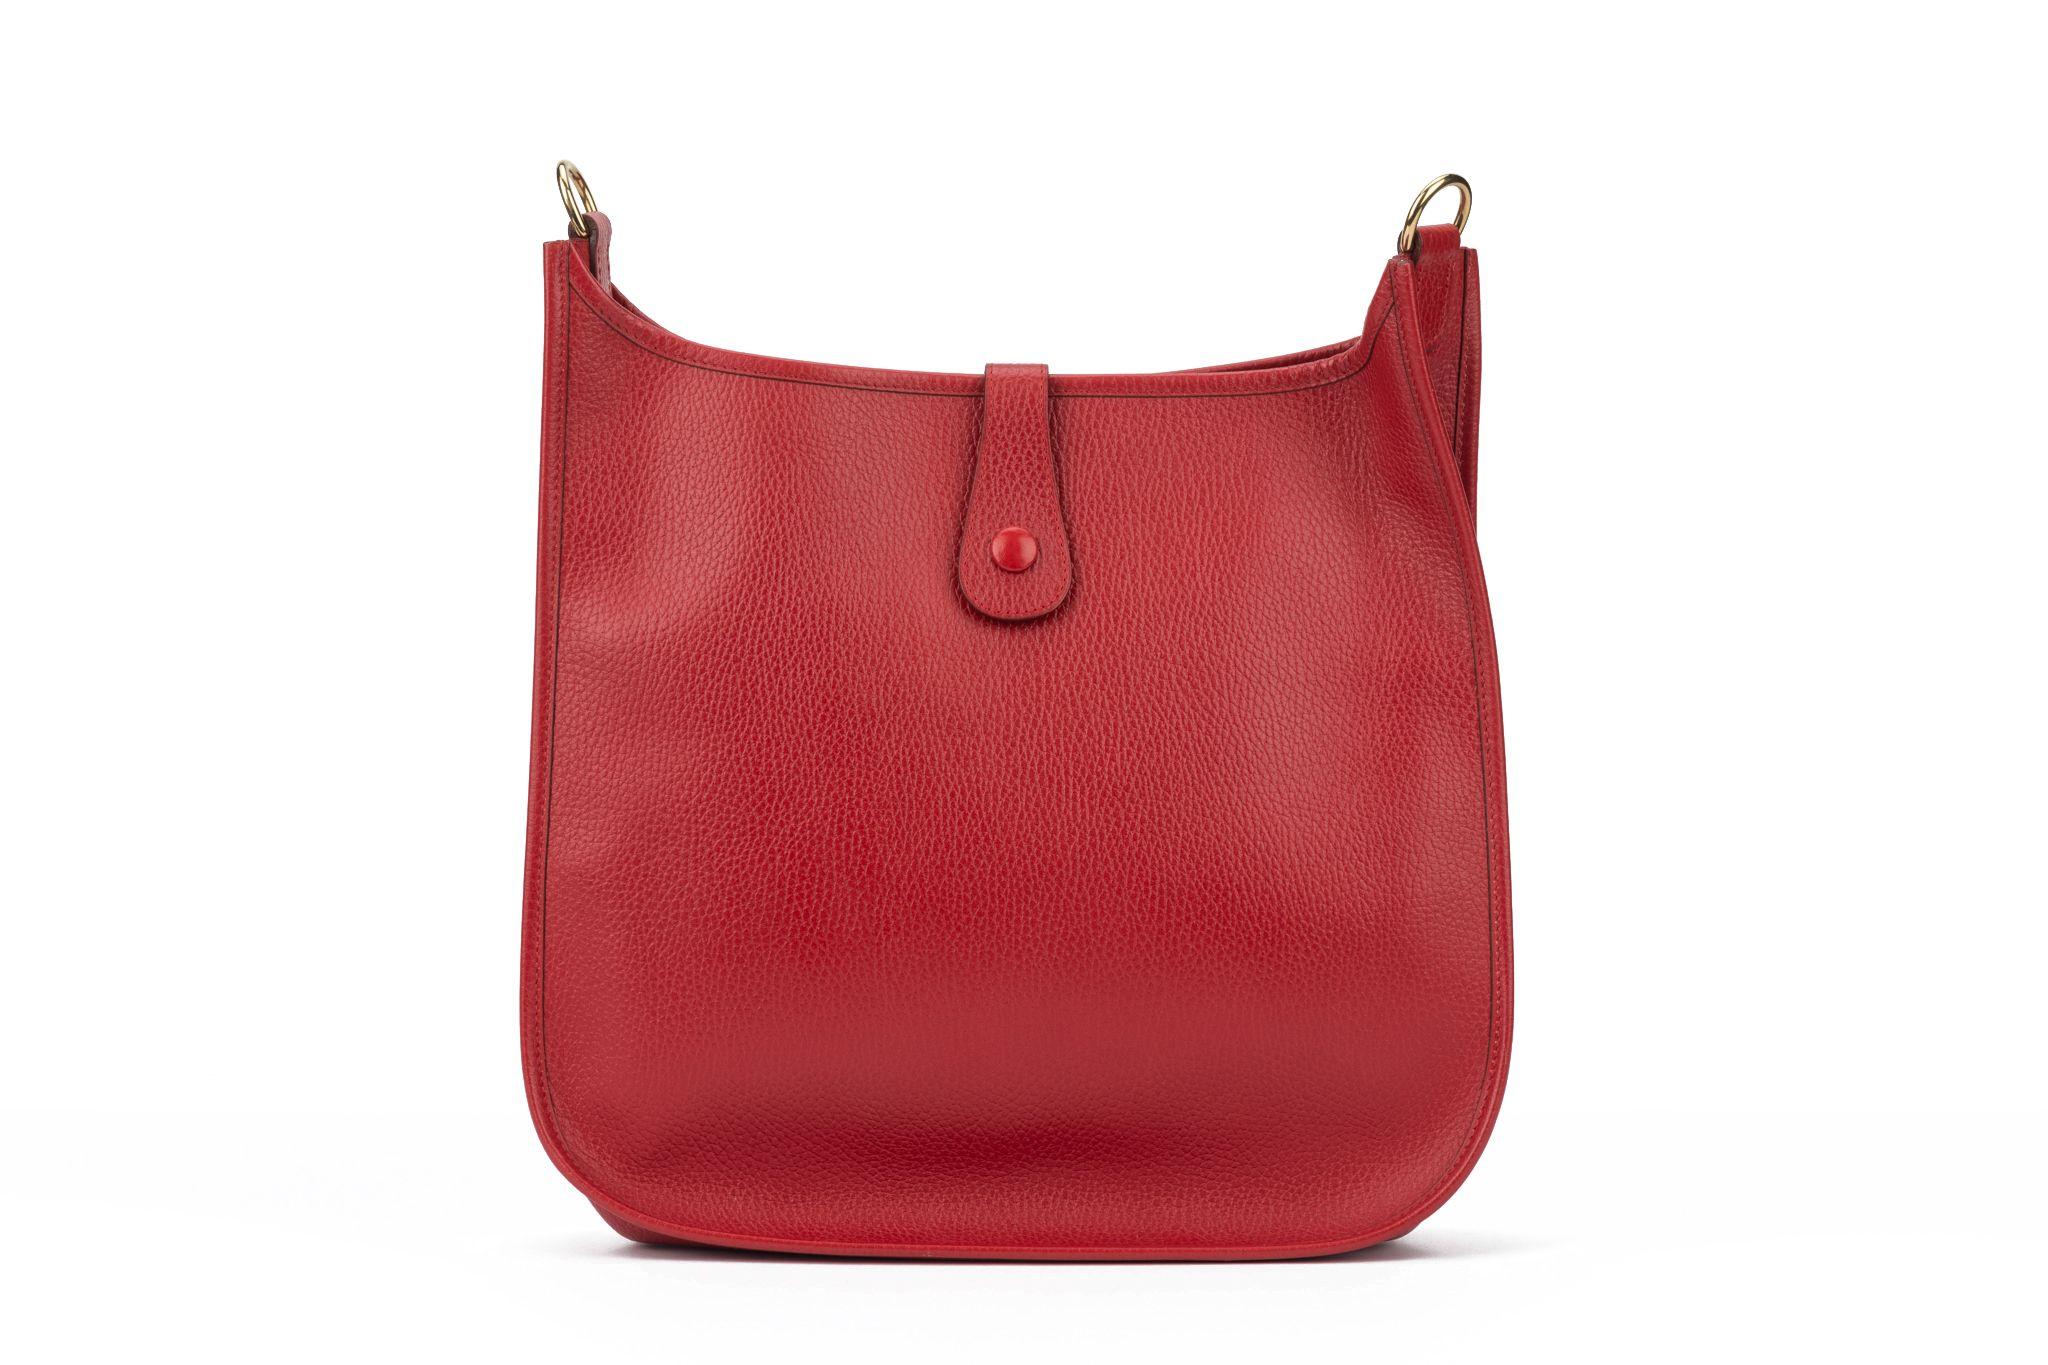 Hermès Evelyne GM featuring Ardennes  leather in red. It comes with palladium gold hardware and has a shoulder strap made of fabric. Date stamp Y in a circle. The bag is in excellent condition. It comes with the original dustcover.